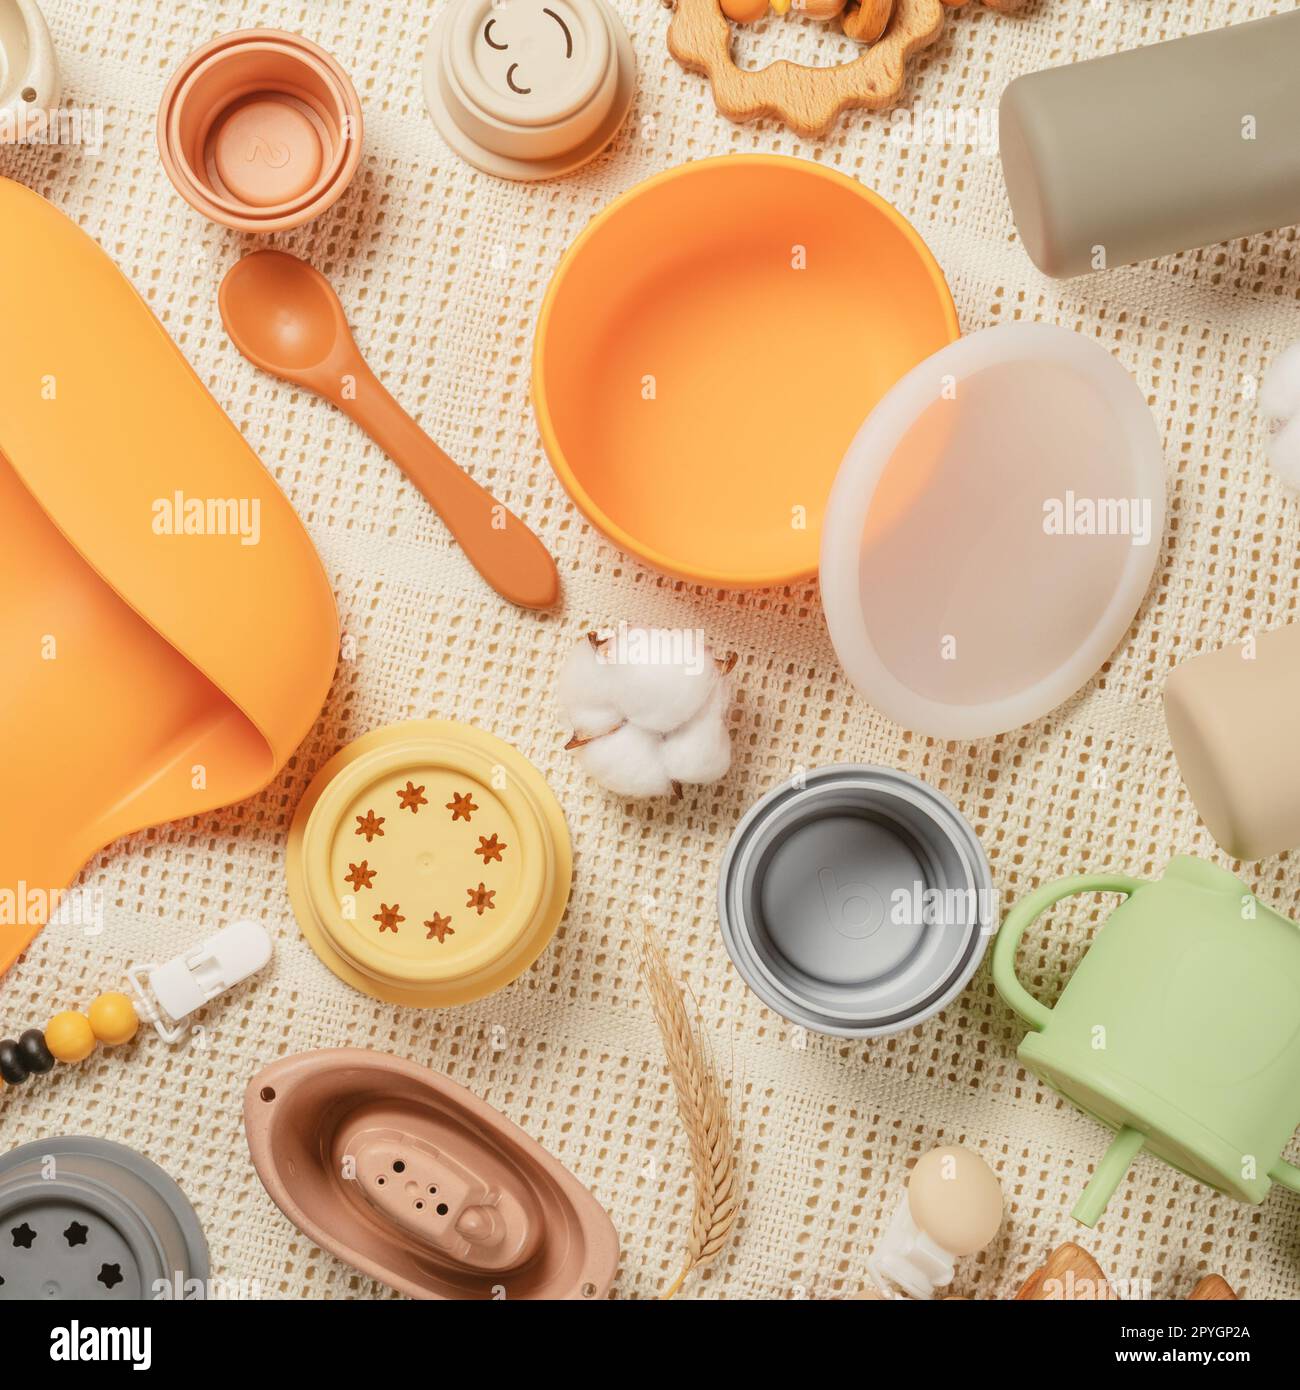 Pastel silicone set of tableware, cutlery, bib, accessories and wooden toys for children on white cloth background. Stock Photo